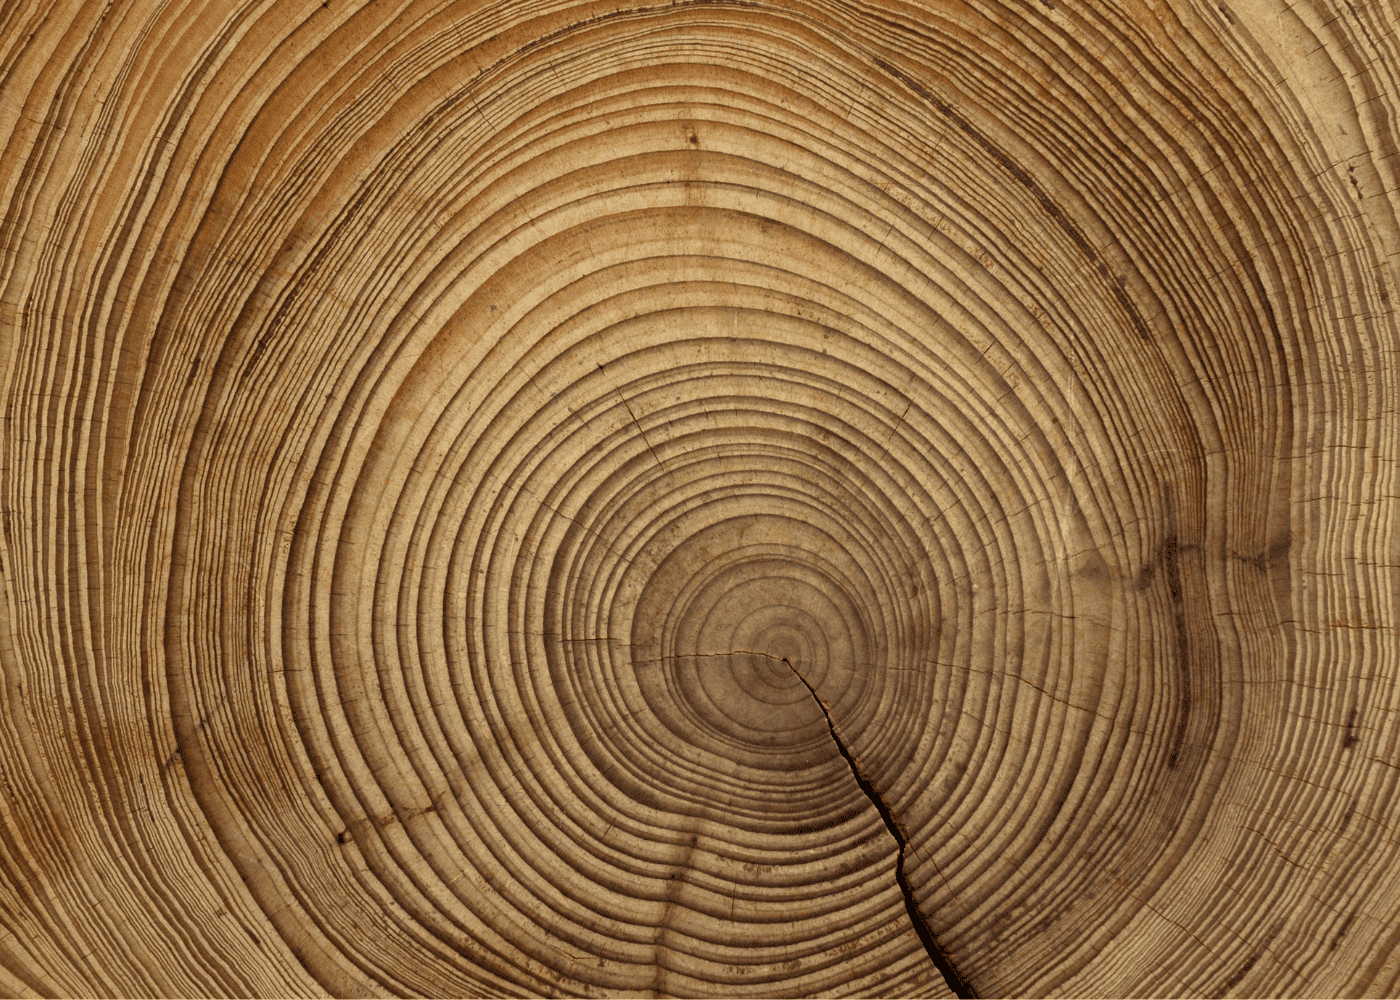 Counting tree rings